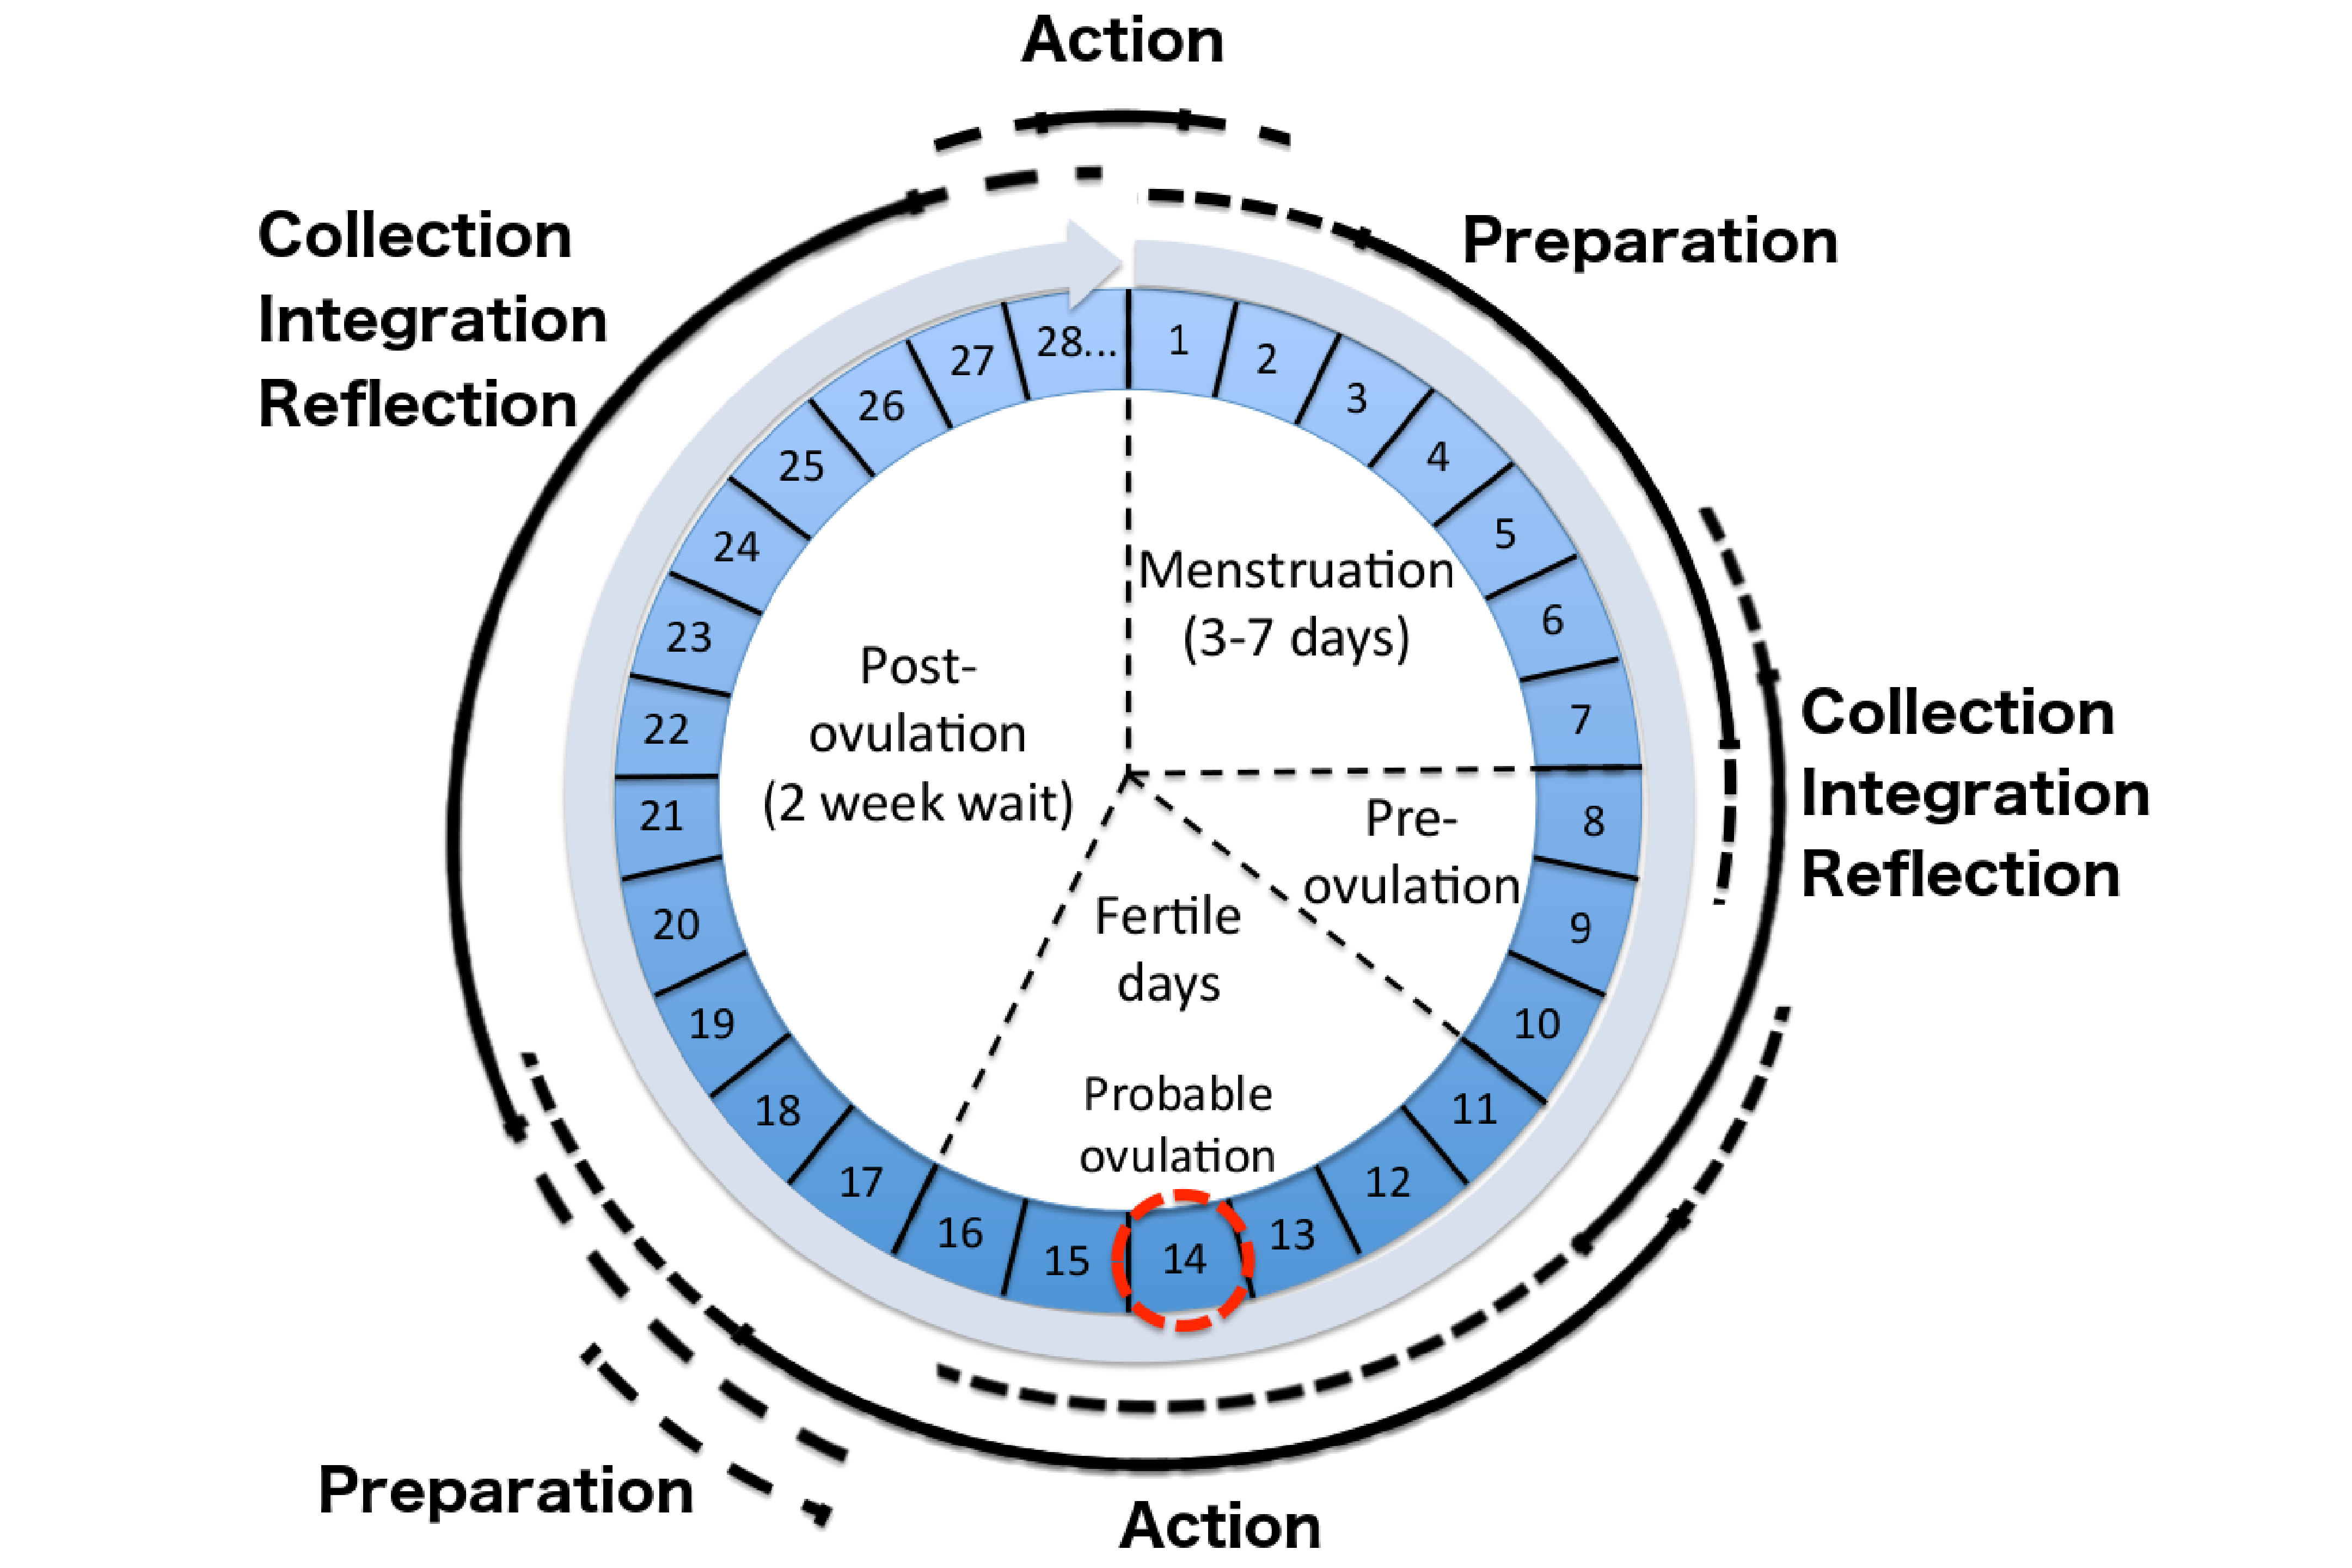 application of the personal informatics model to the fertility cycle